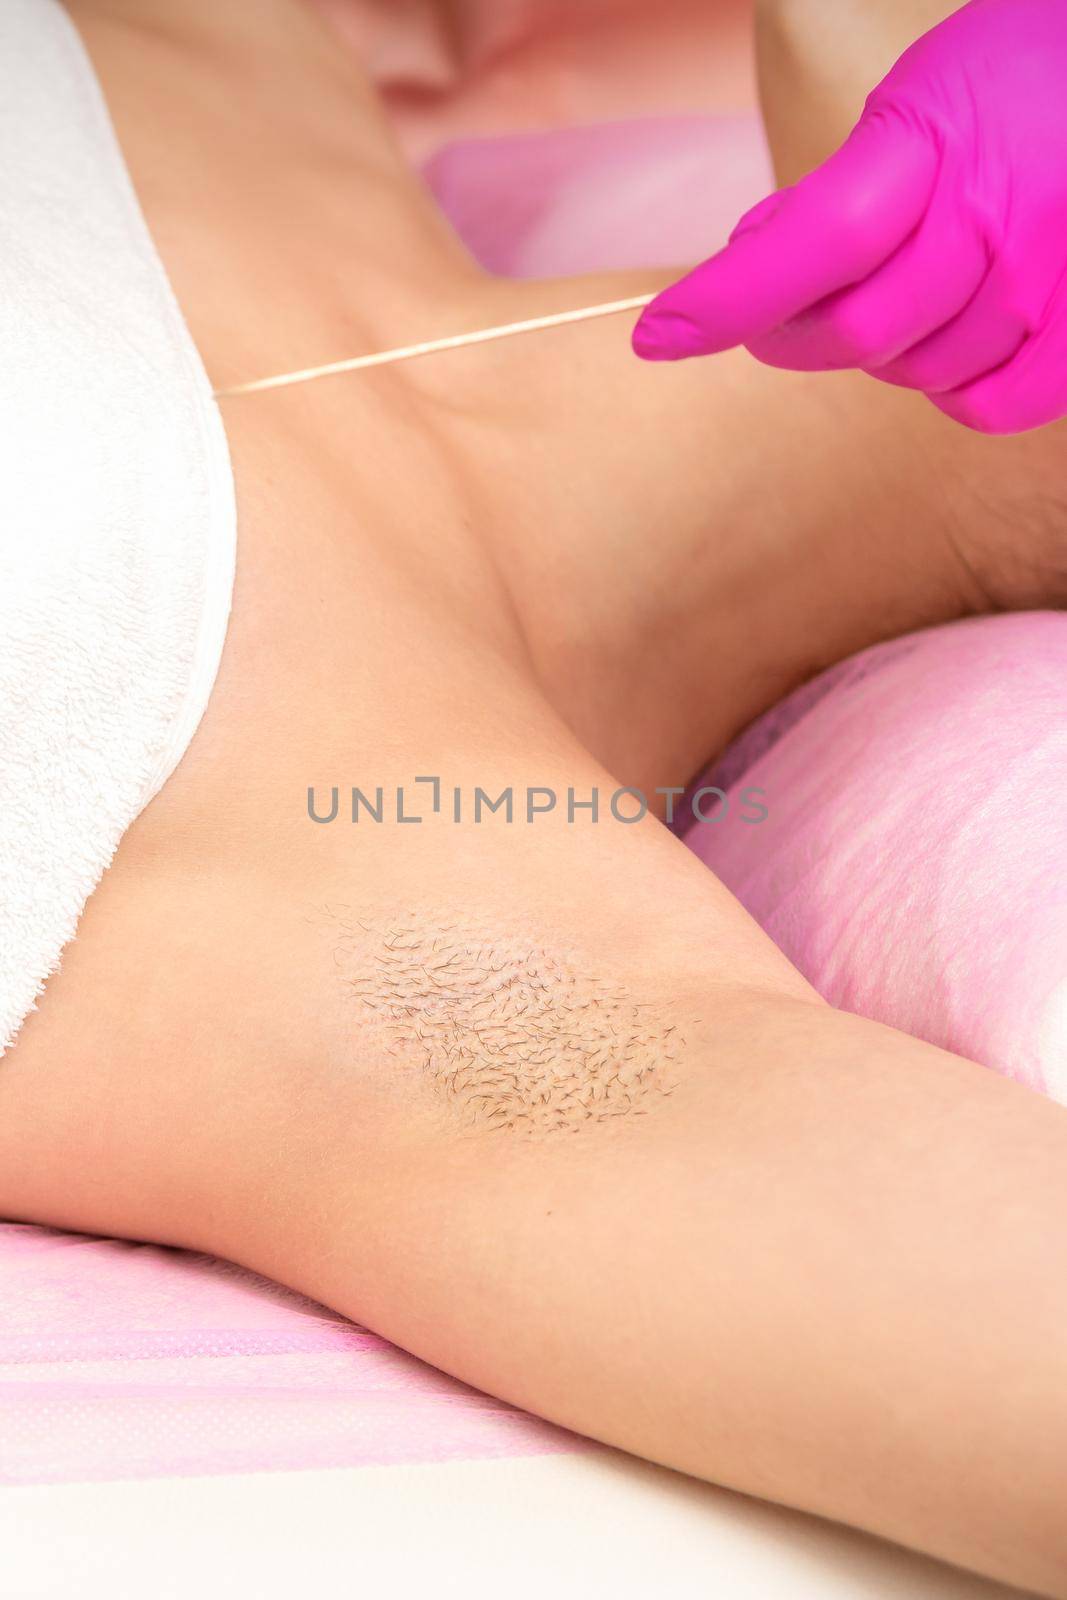 Hand in glove with spatula depilates female hairy armpit in a spa. by okskukuruza